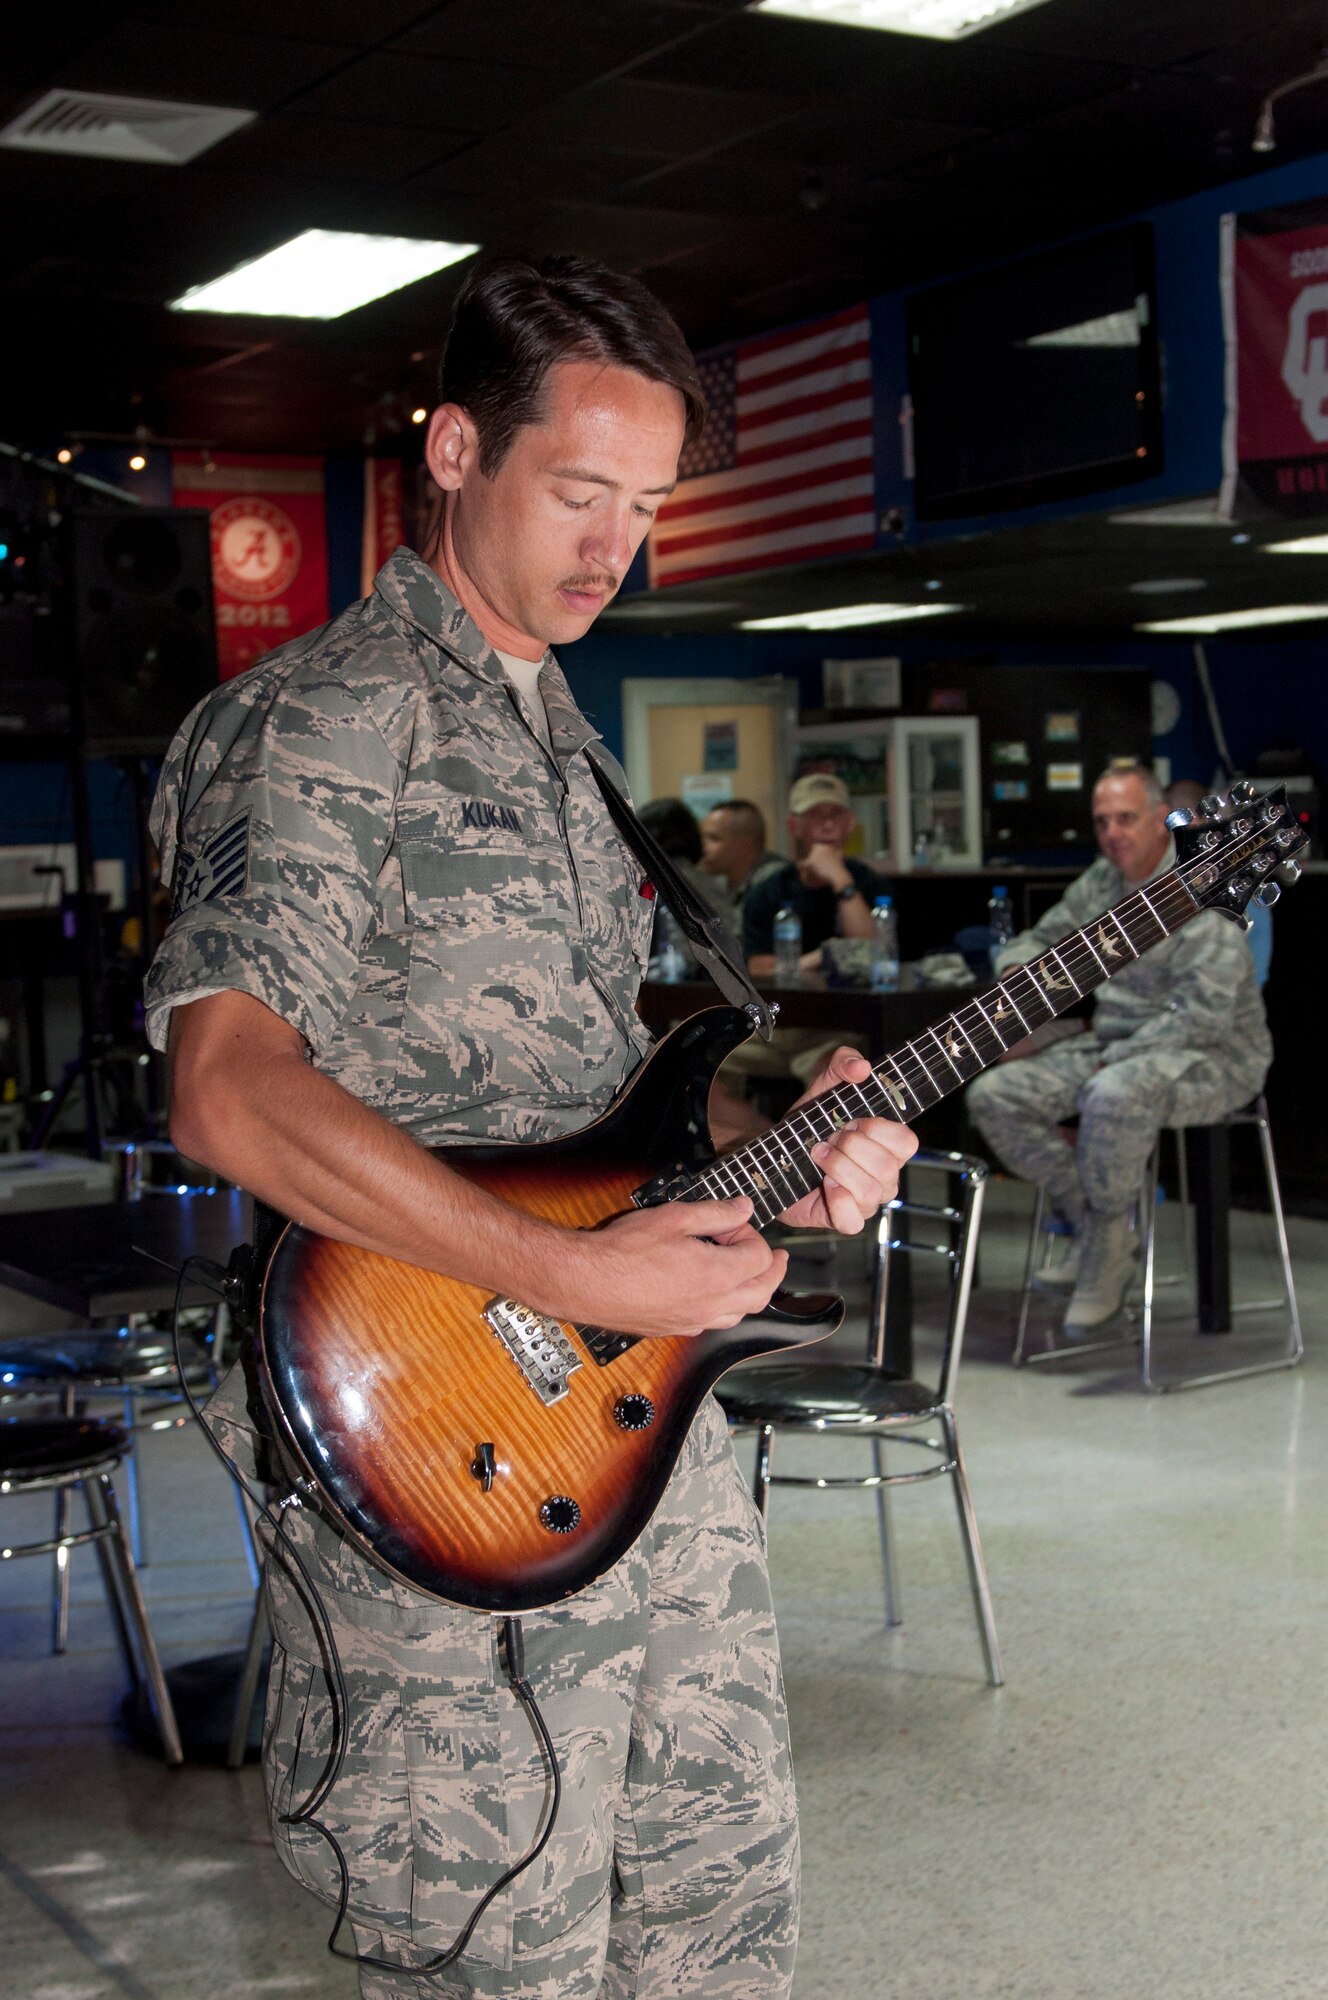 Tech. Sgt. Johnny Kukan, lead guitarist with Starrlifter, plays at the Drop Zone at The Rock June 17, 2014. Starlifter is a seven-member group of talented musicians that performs in virtually every musical idiom and was here in support of Operation Enduring Freedom. (U.S. Air Force photo by Senior Master Sgt. Allison Day)